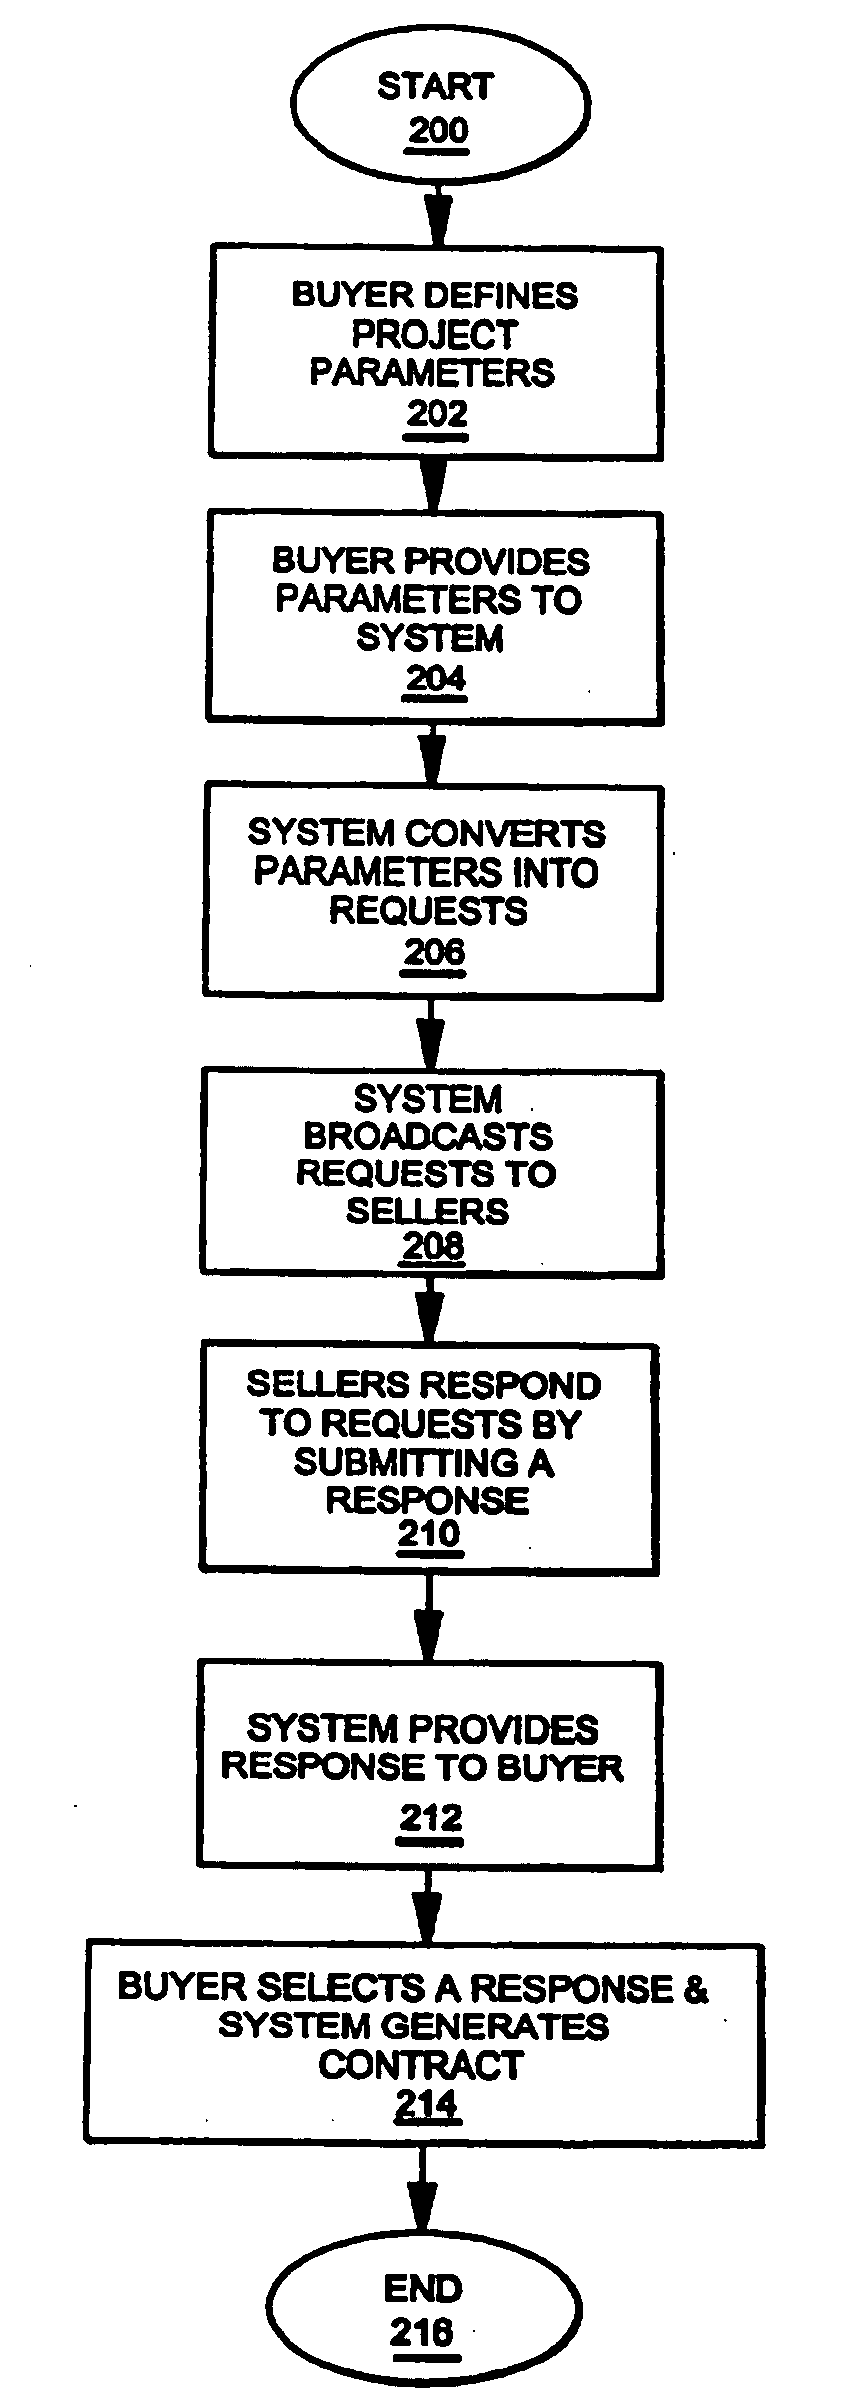 Method and process for providing relevant data, comparing proposal alternatives, and reconciling proposals, invoices, and purchase orders with actual costs in a workflow process